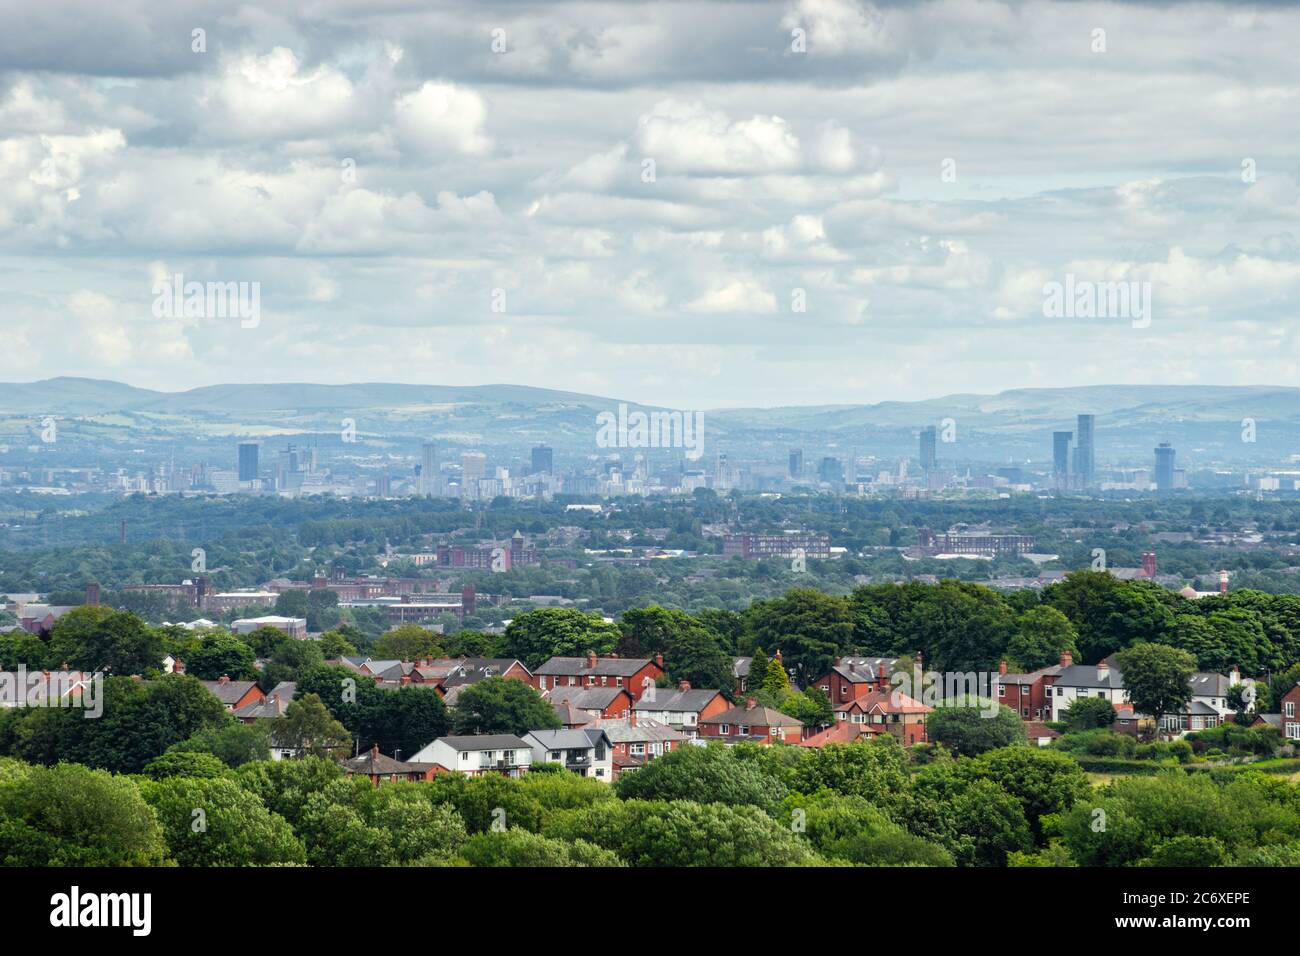 City of Manchester (England, UK) skyline seen from Horwich, Lancashire with suburbs in the foreground. Also known as cottonopolis, warehouse city Stock Photo